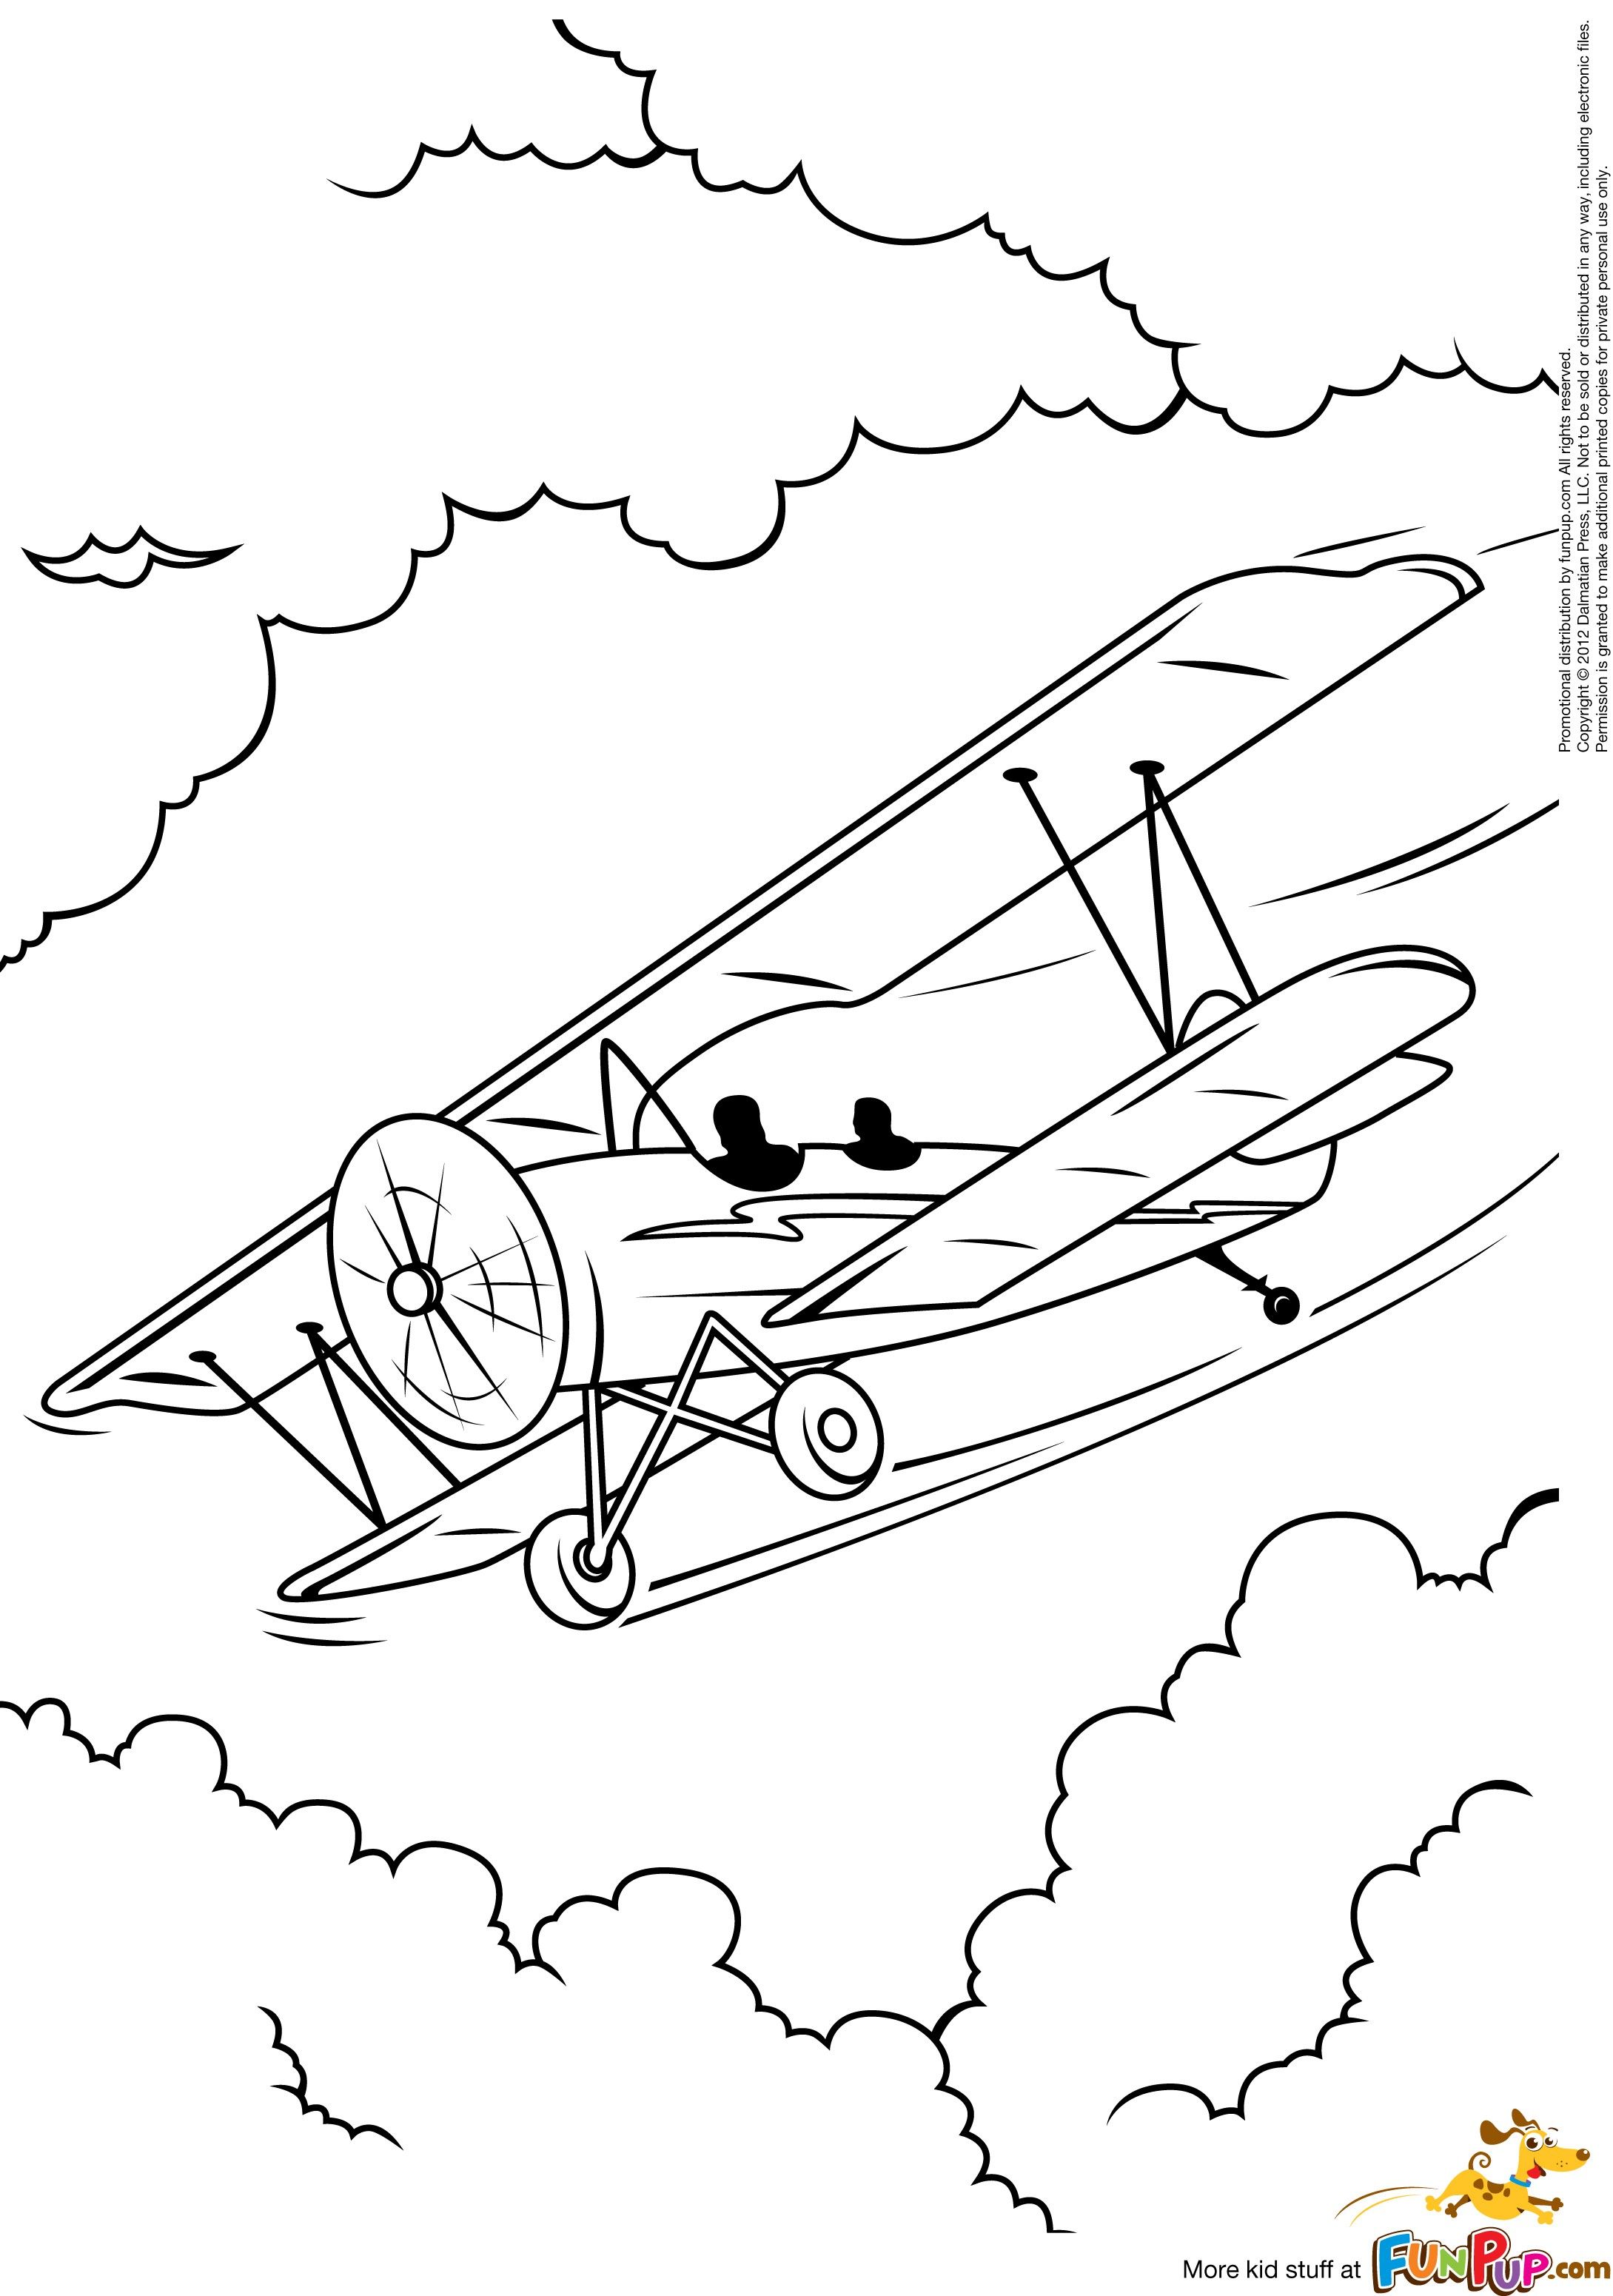 Aviation Coloring Pages at GetColorings.com | Free printable colorings